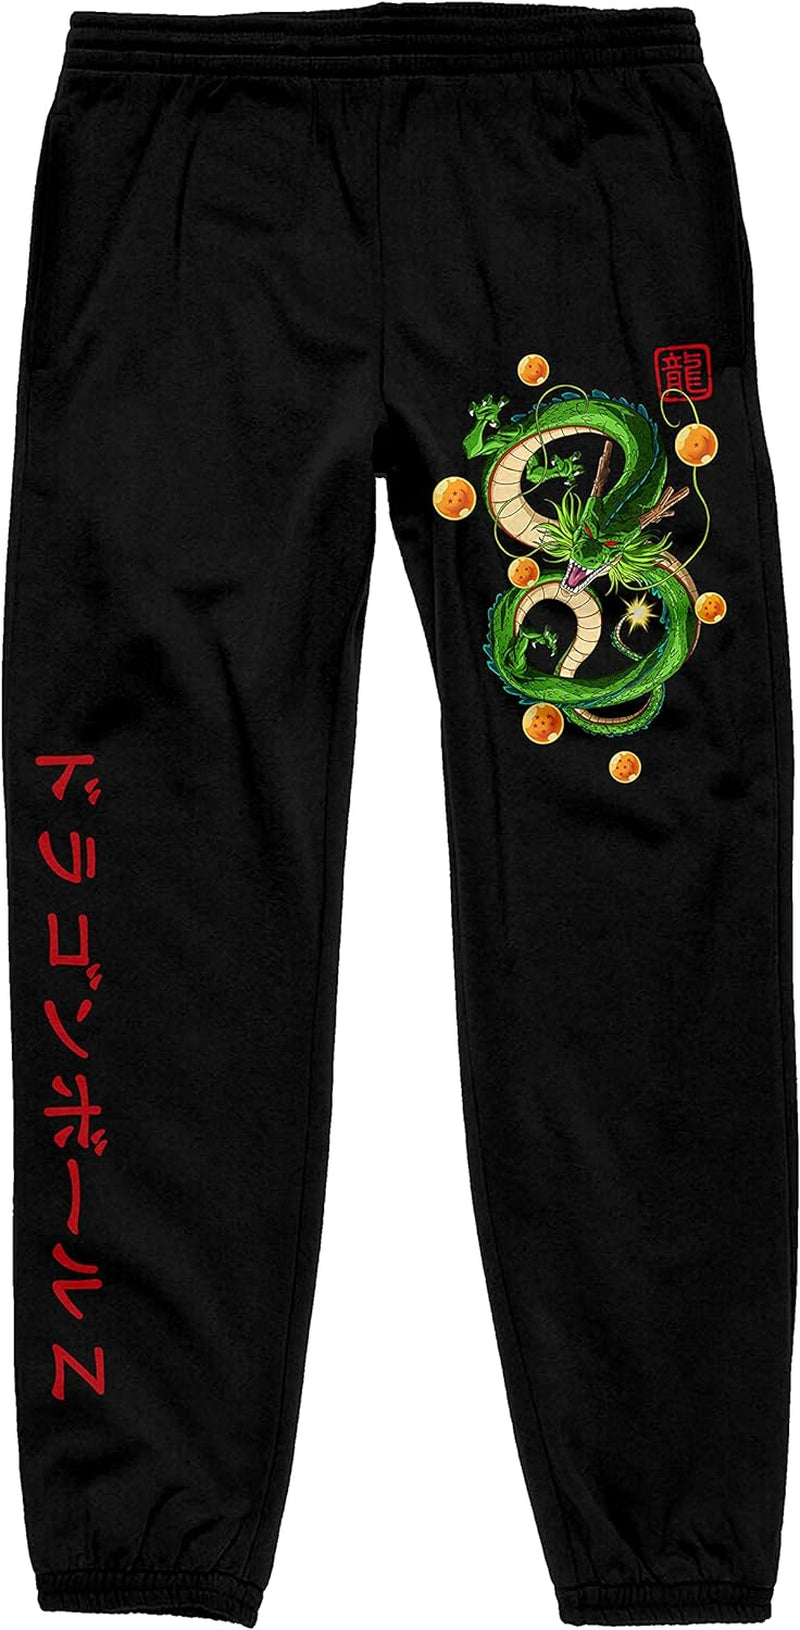 "Unleash Your Inner Anime Warrior with Dragon Ball Z Shenron Kanji Graphic Sweatpants - Channel the Power of the Dragon!"